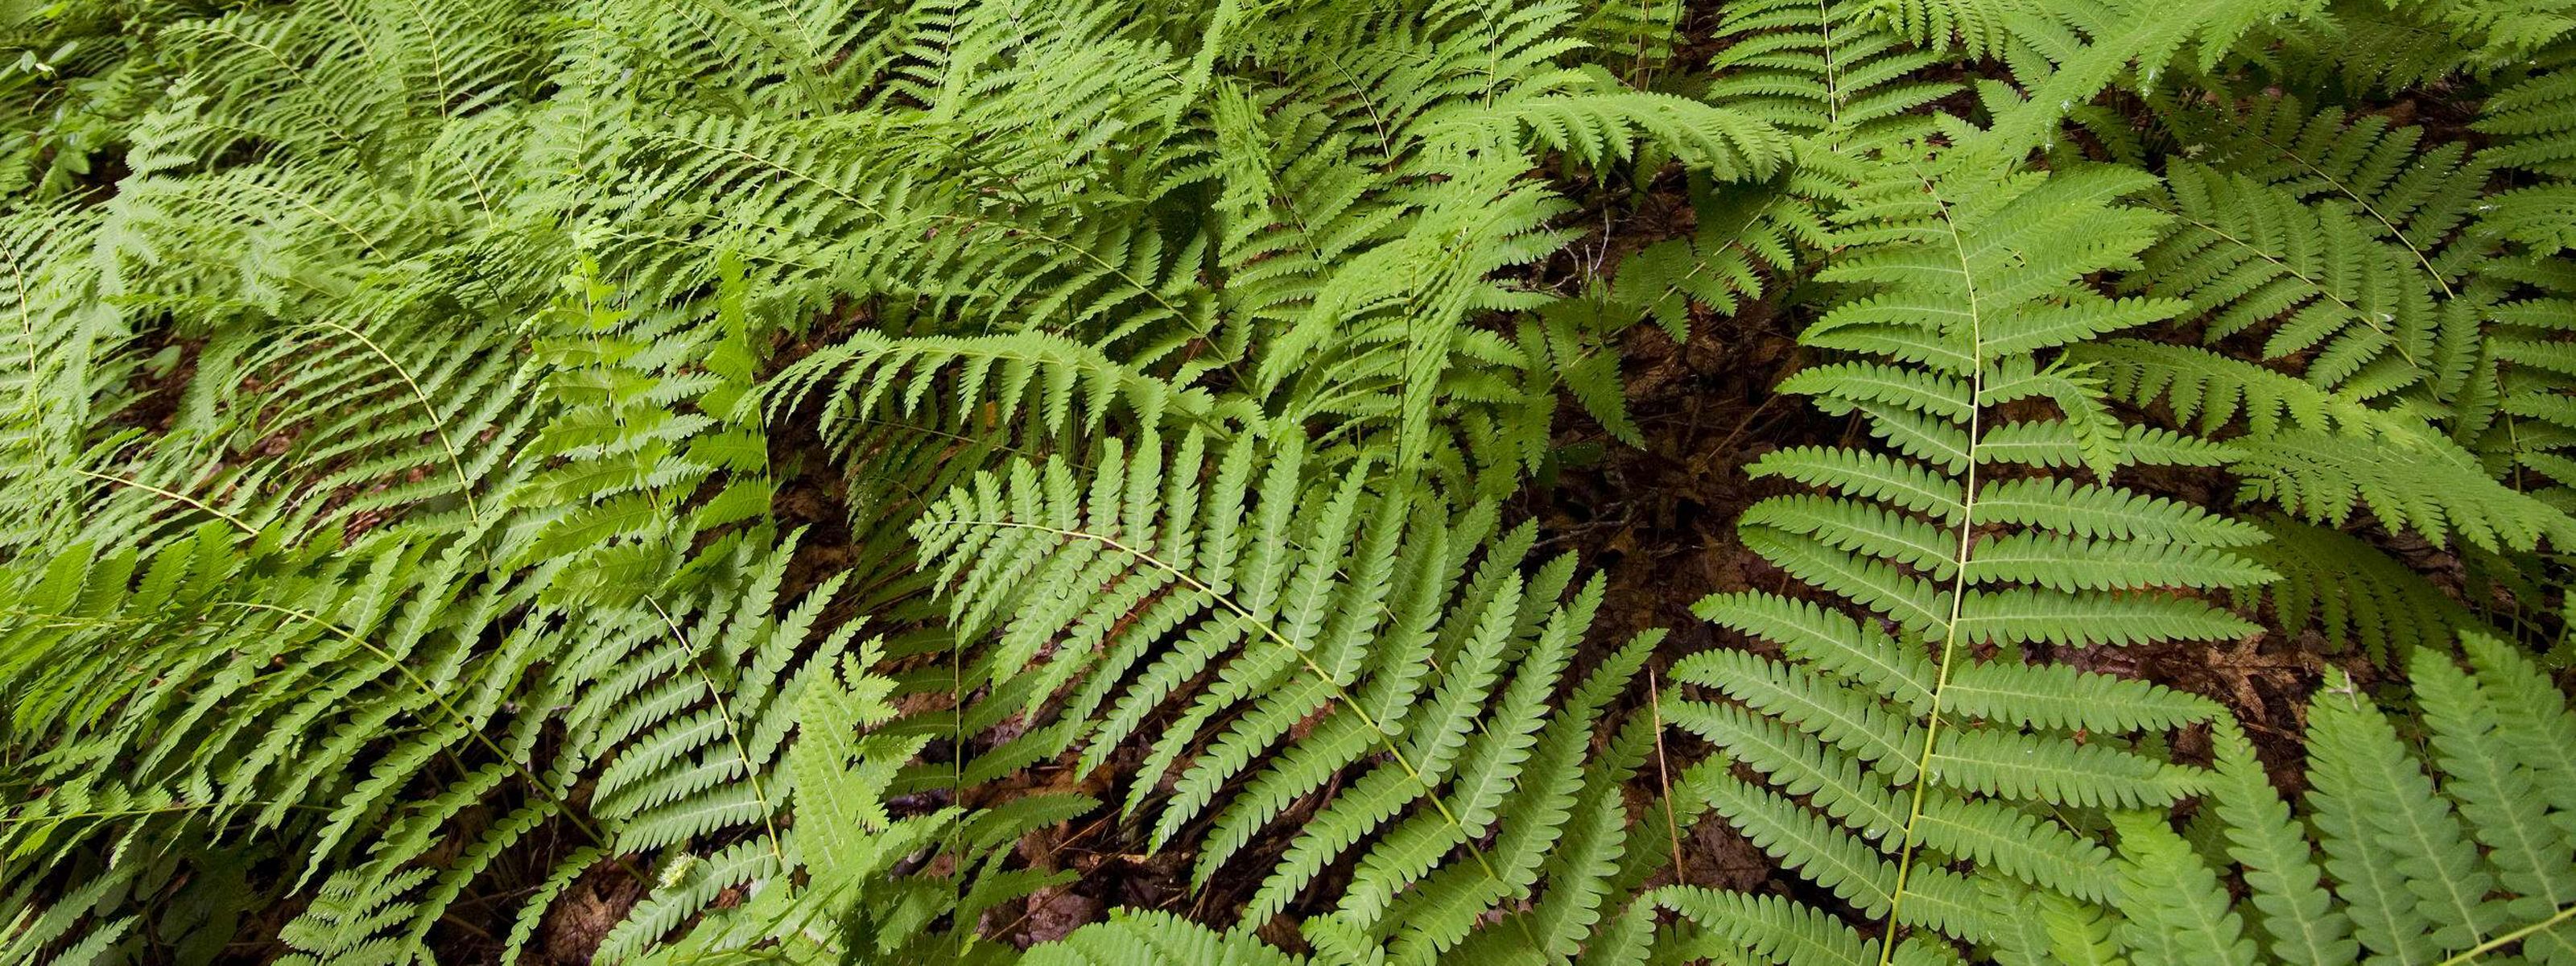 Bright green ferns cover a forest floor.